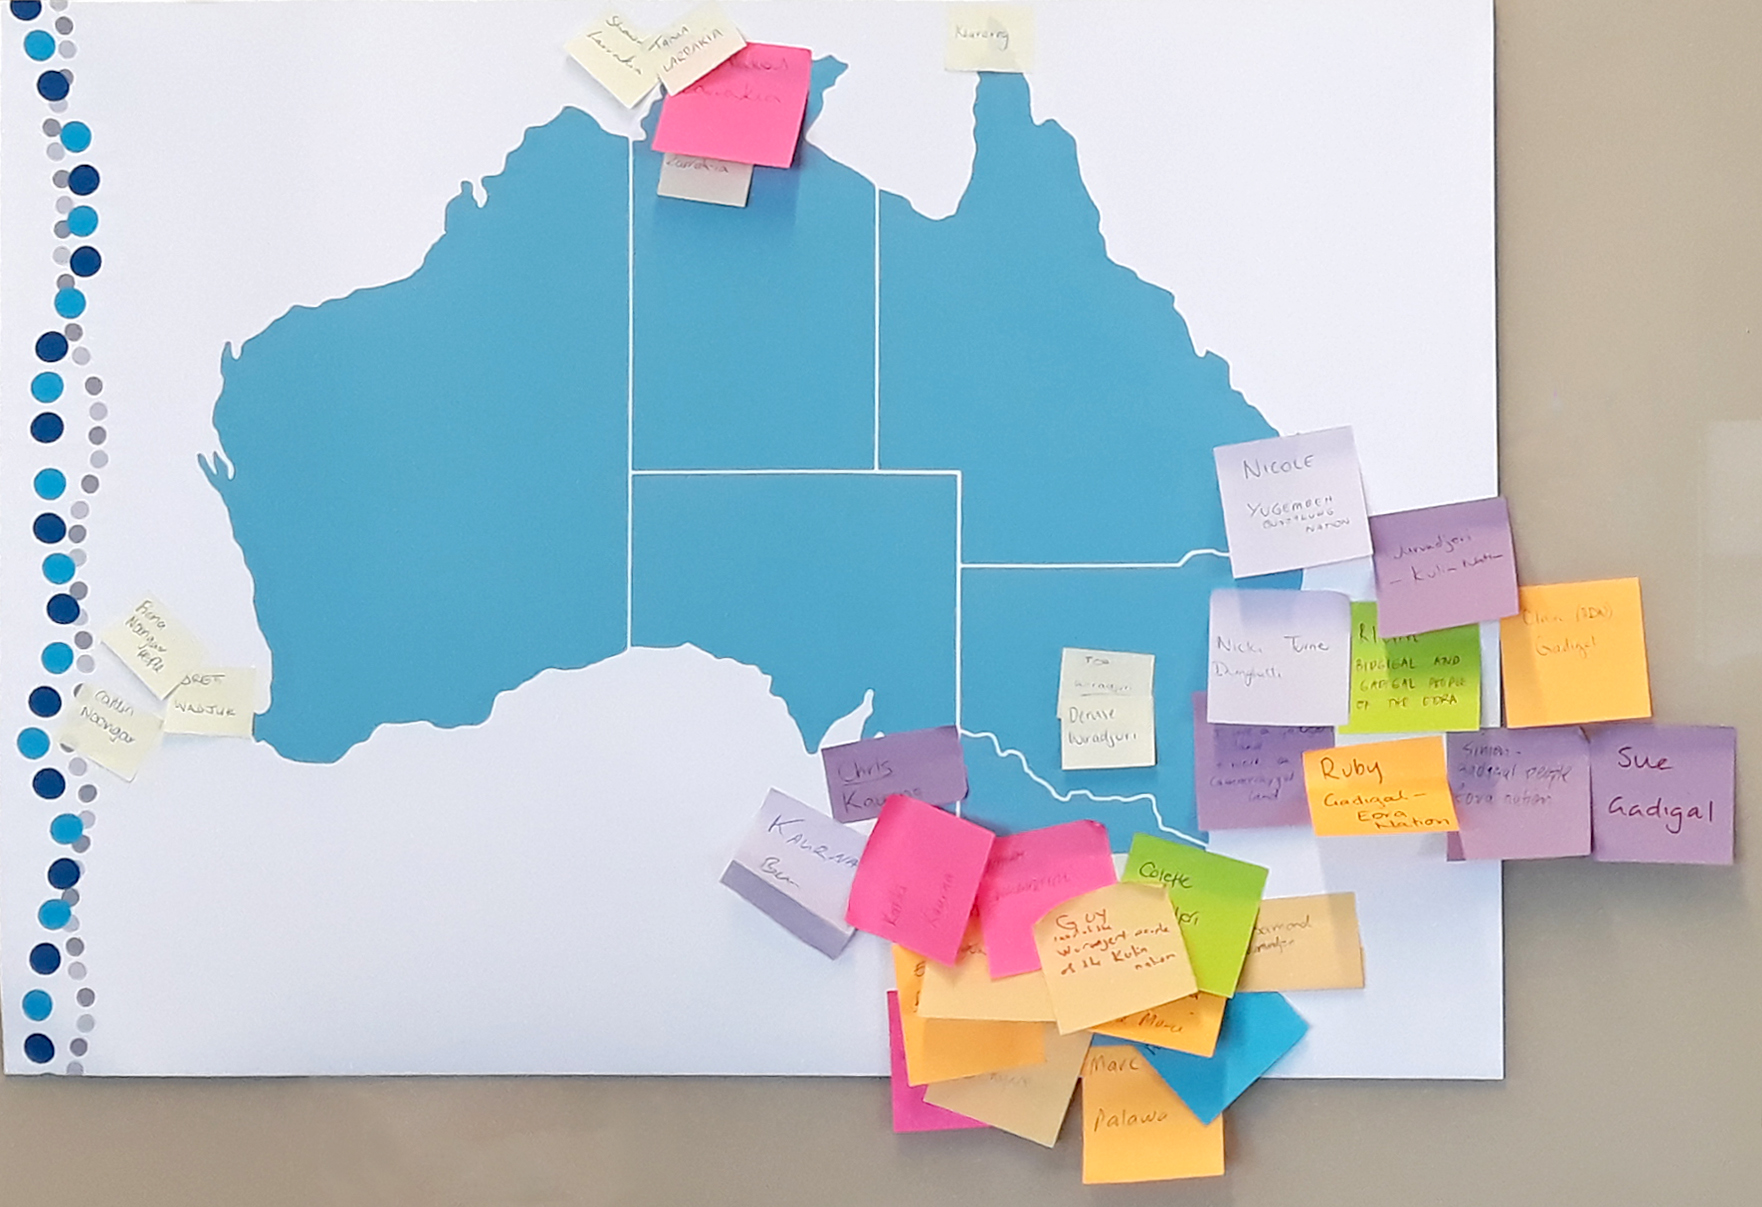 map showing participant locations with post it notes